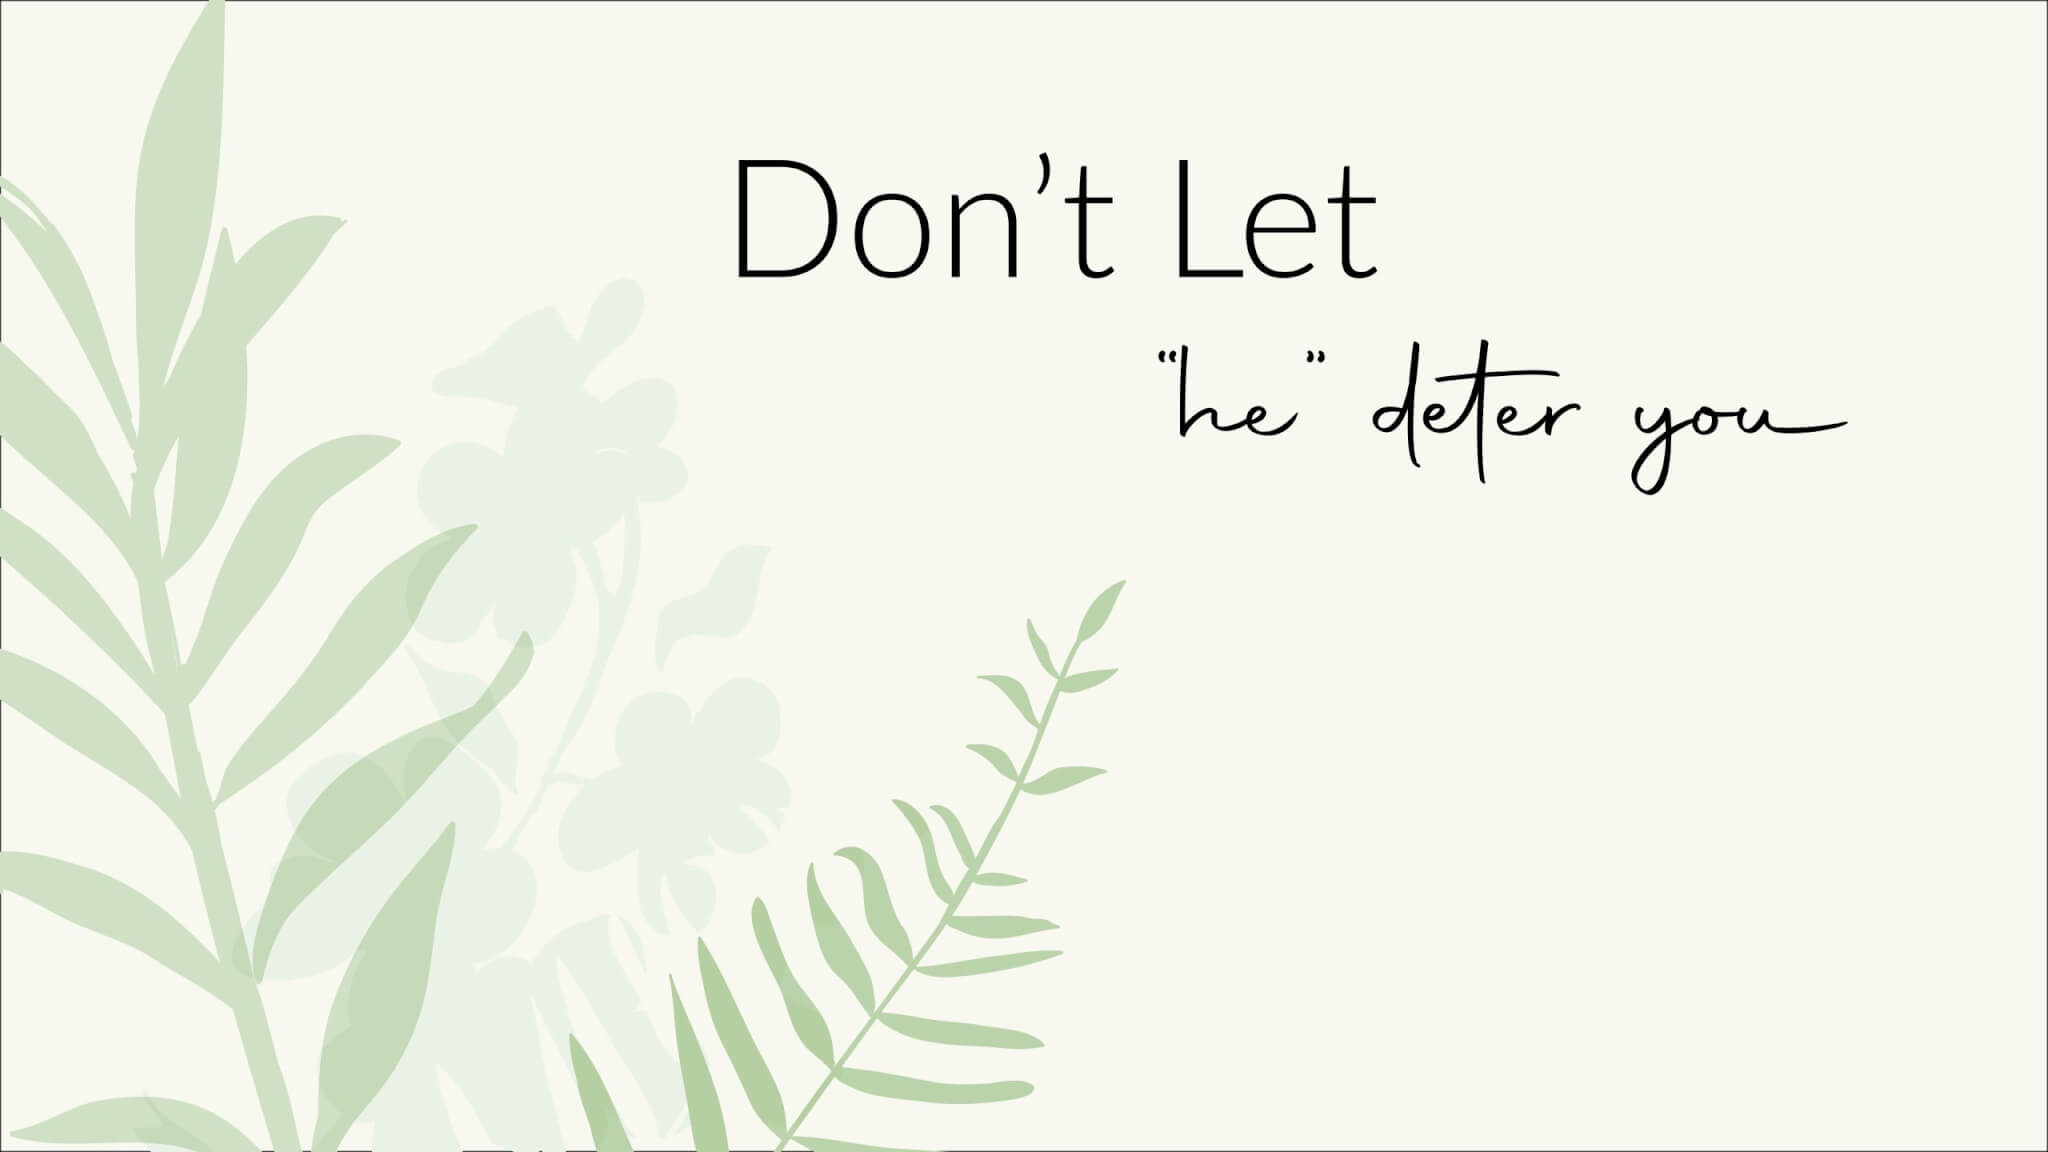 Don’t Let “he” Deter You